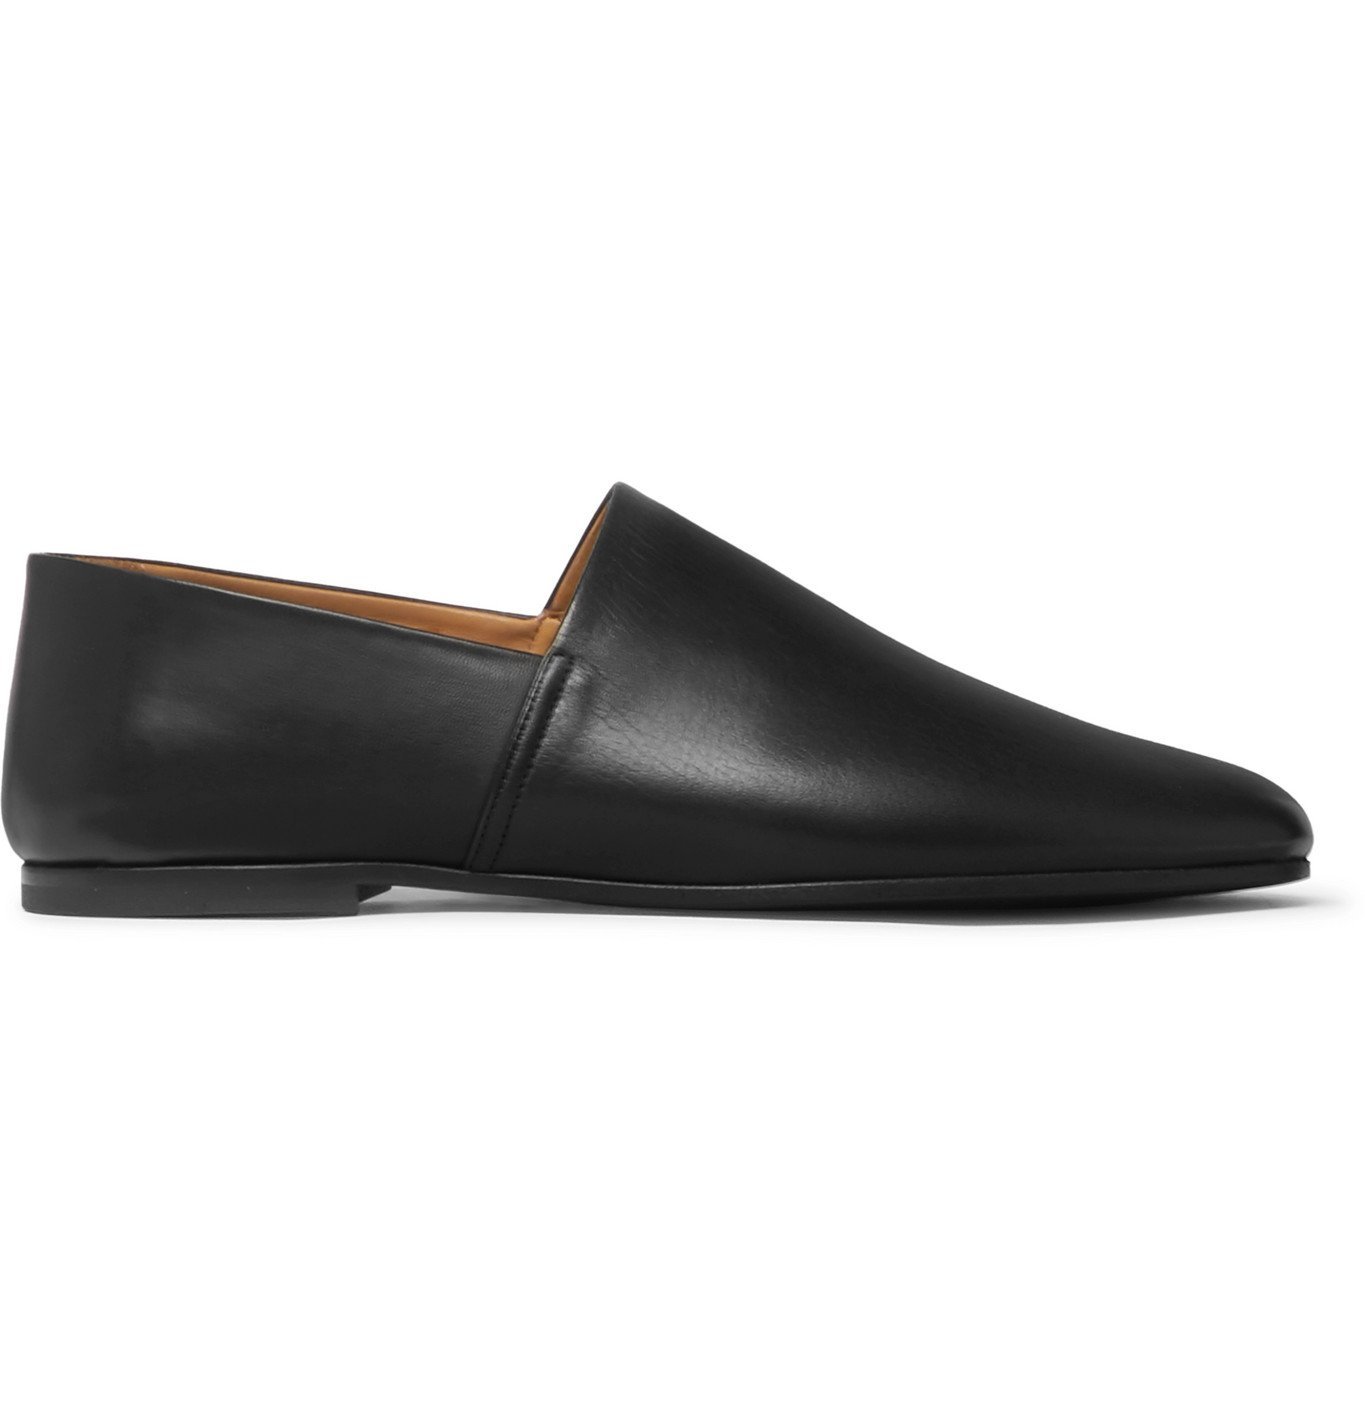 Sandro - Collapsible-Heel Leather Slippers - Black Sandro